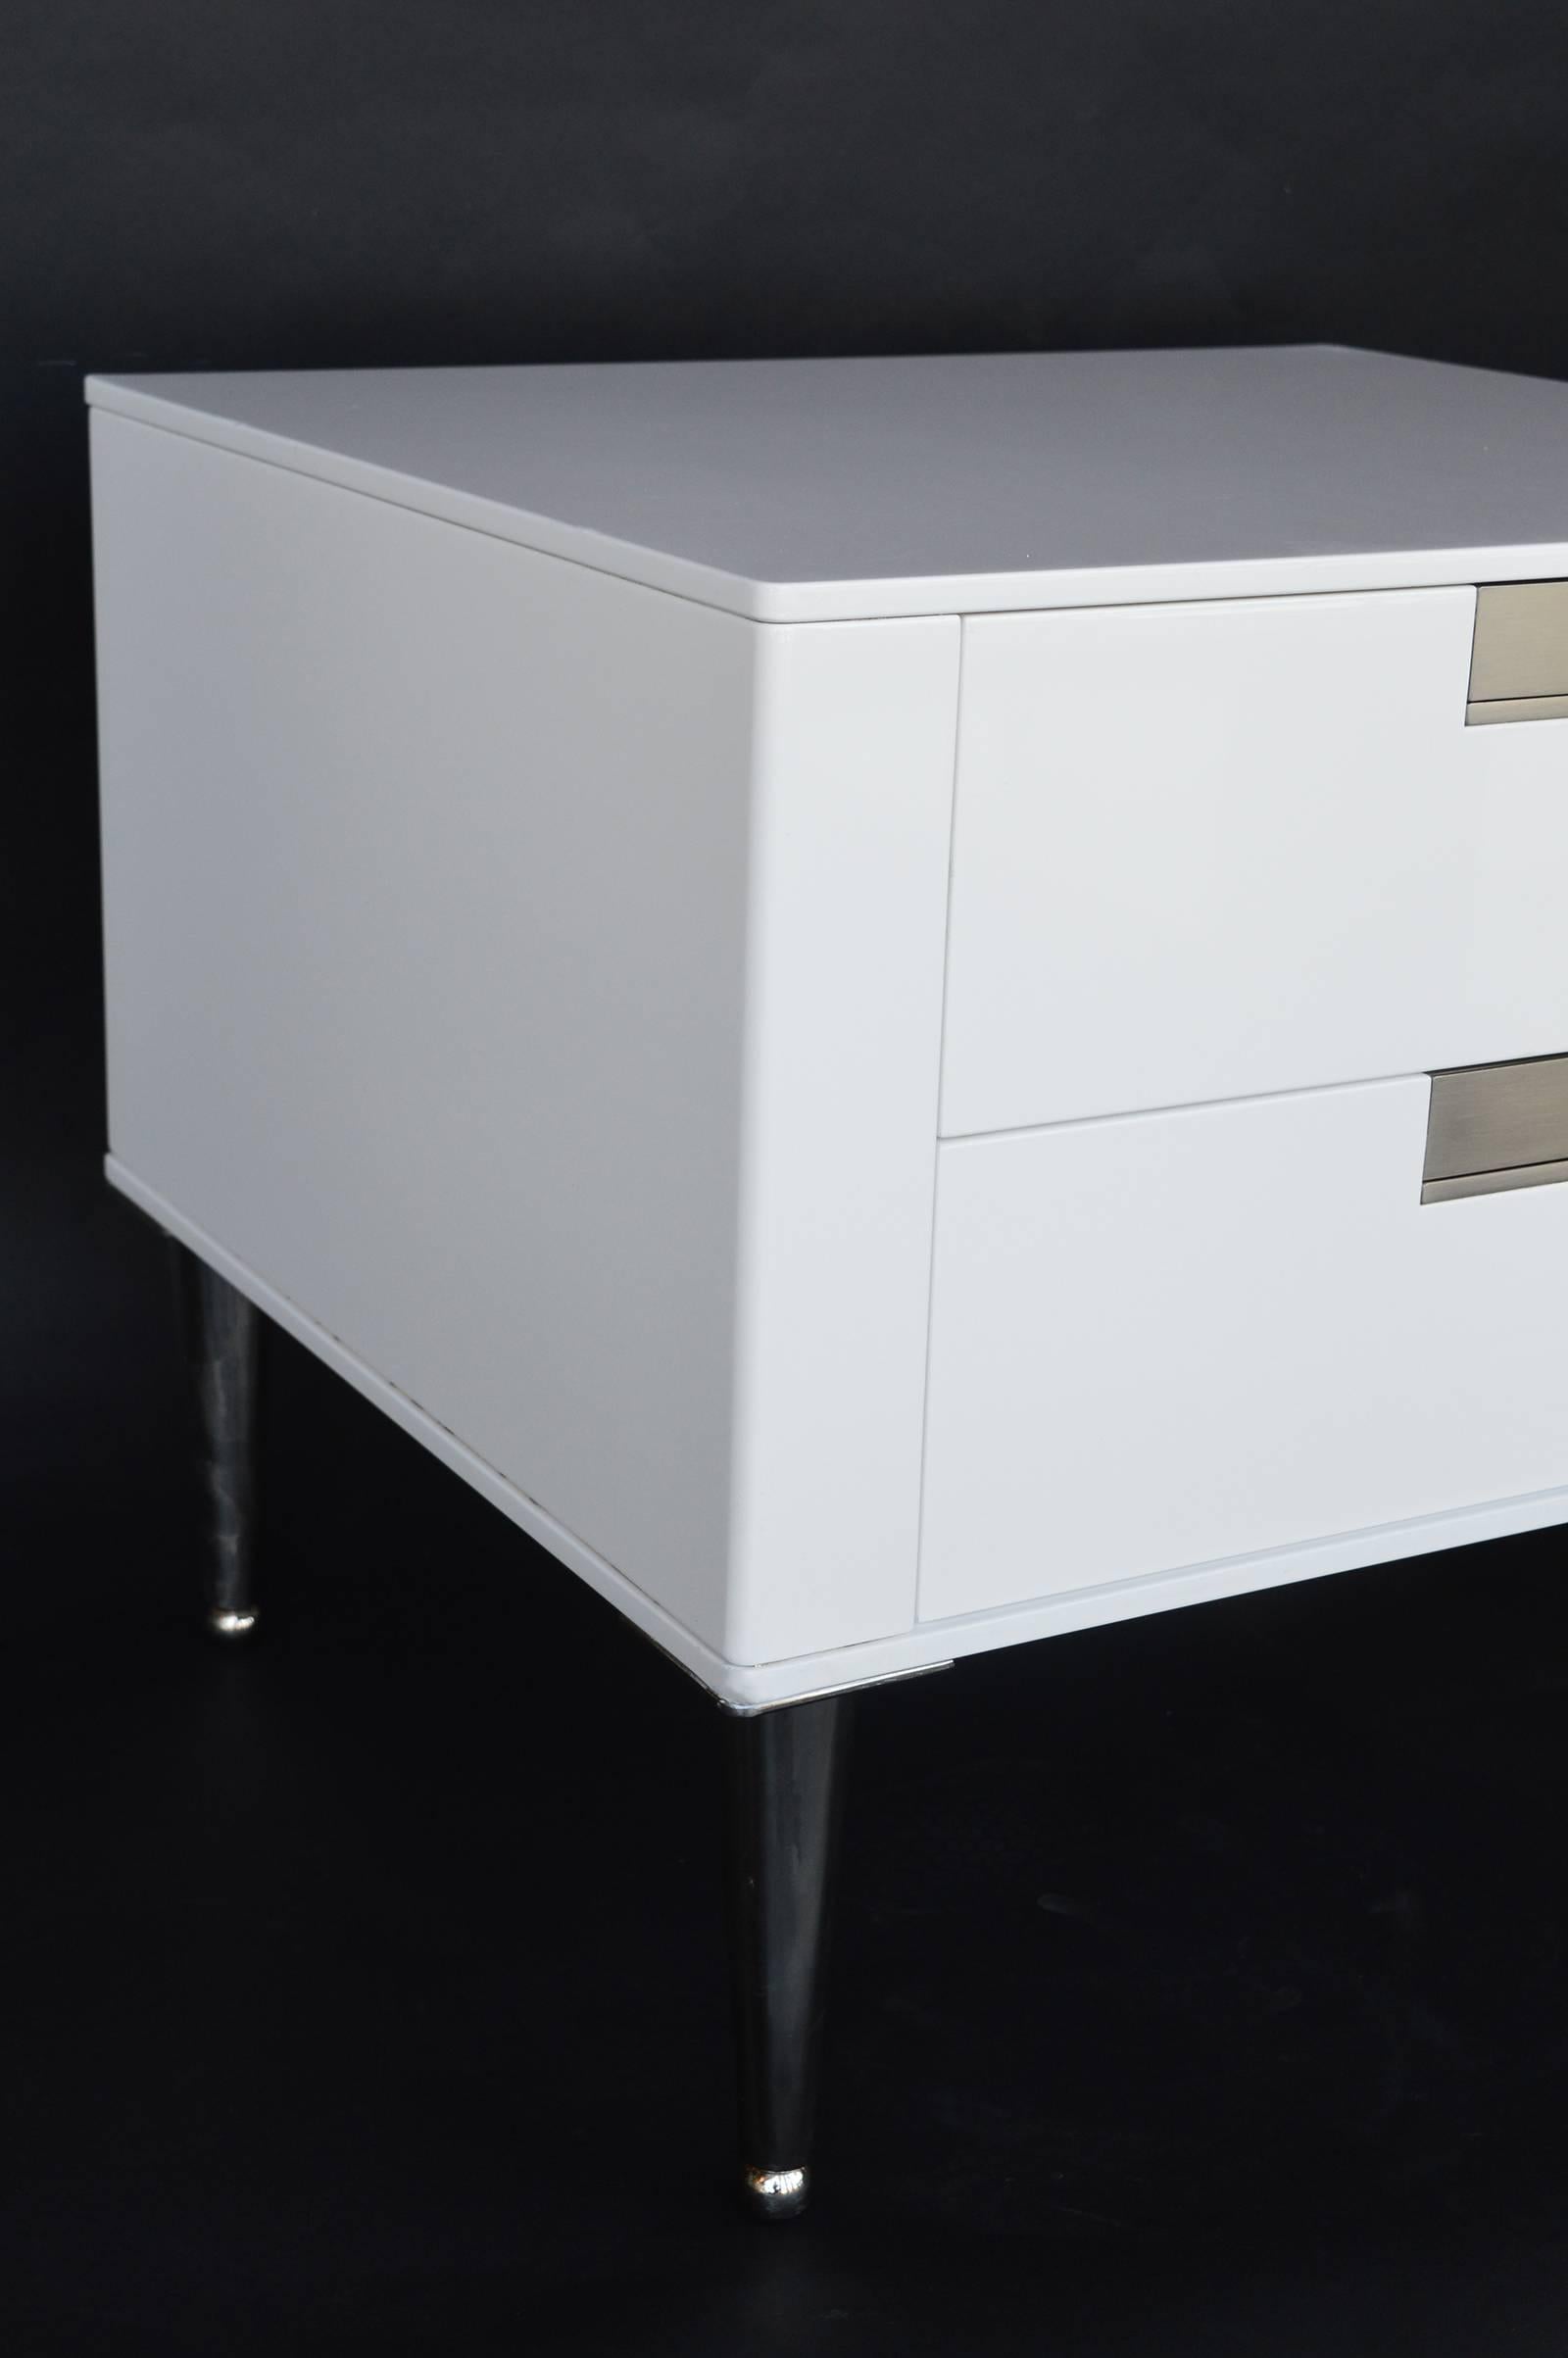 White two drawered nightstands with sleek handles. Sticker is on the top outer edge of the drawer.